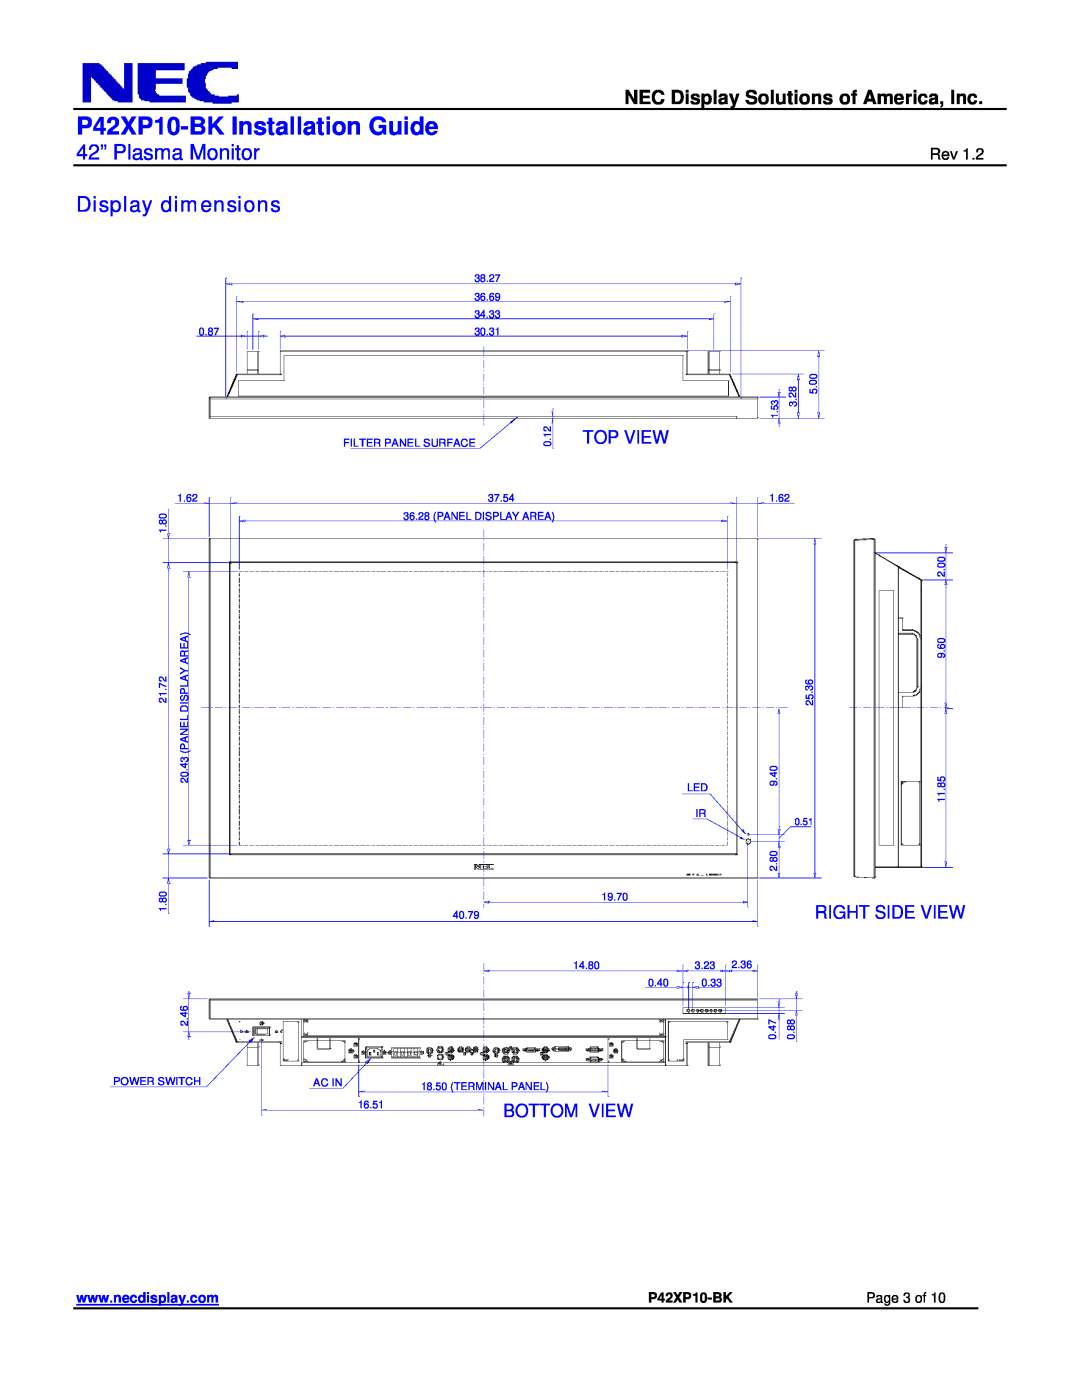 NEC Display dimensions, Top View, Right Side View, Bottom View, P42XP10-BK Installation Guide, 42” Plasma Monitor 